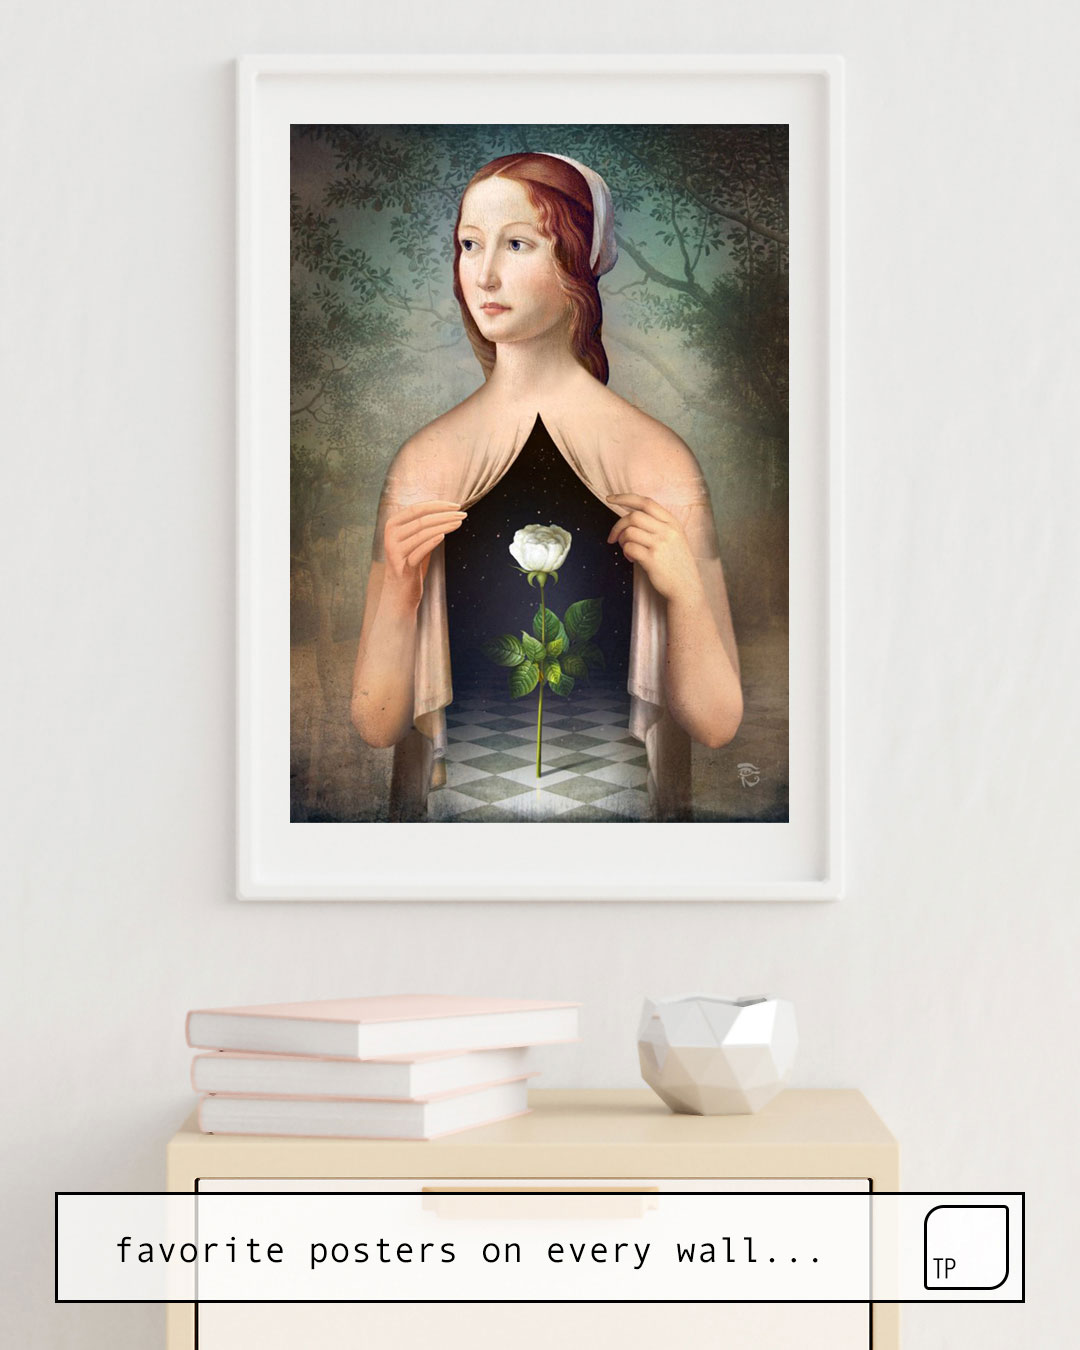 The photo shows an example of furnishing with the motif THE ROSE by Christian Schloe as mural